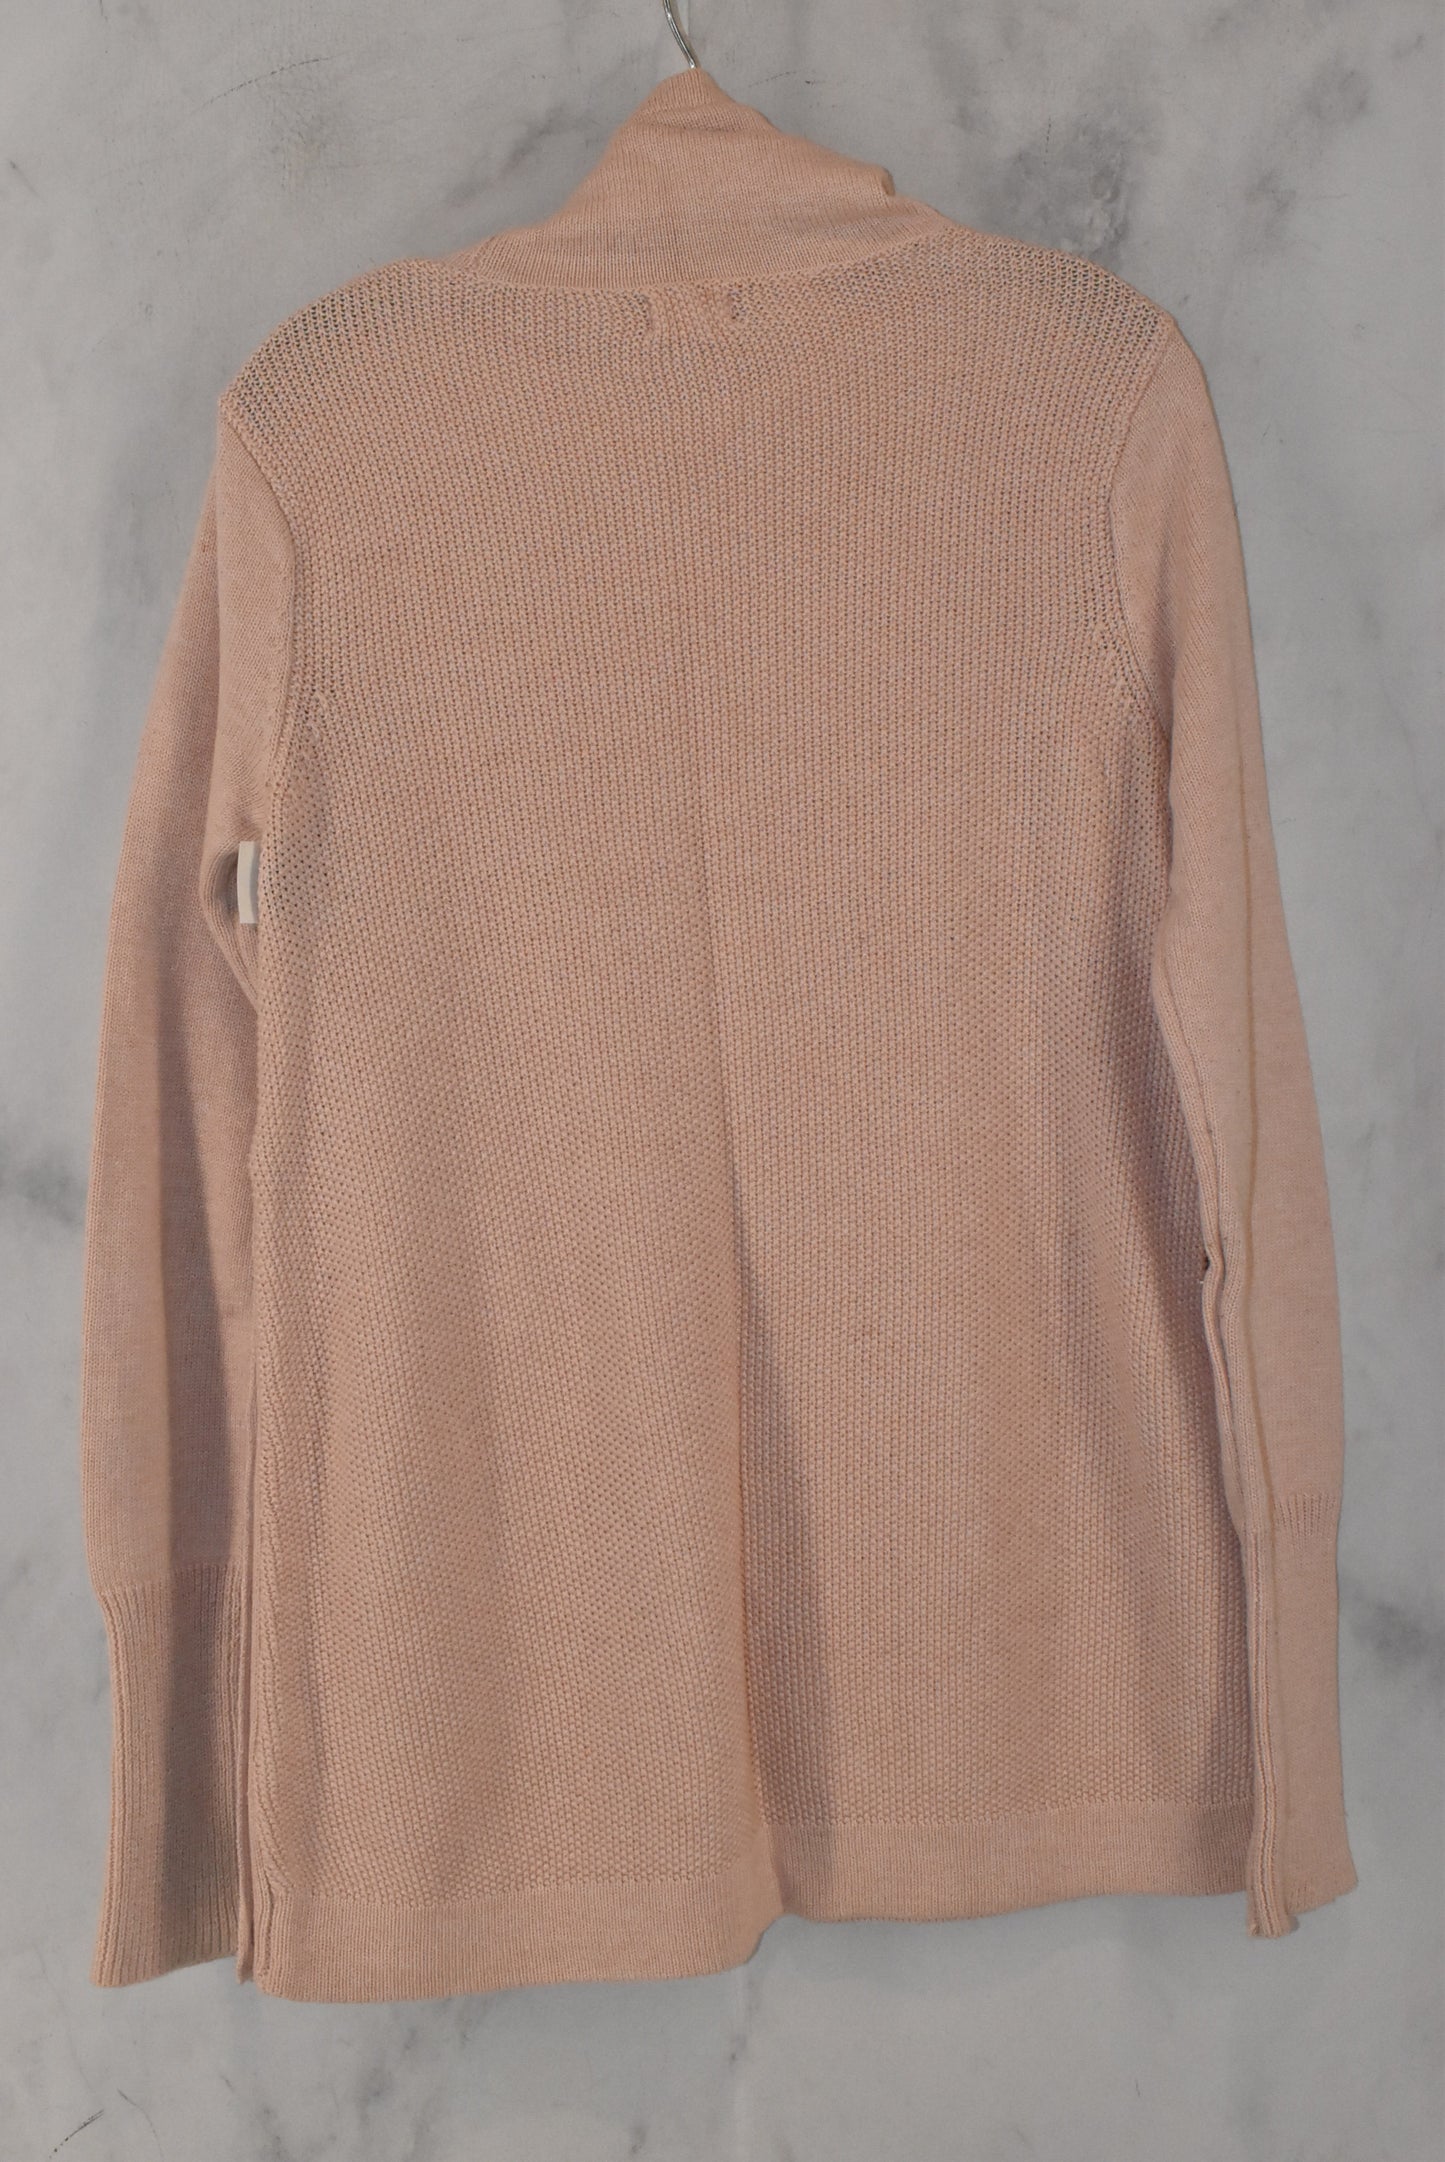 Sweater By Sigrid Olsen  Size: S